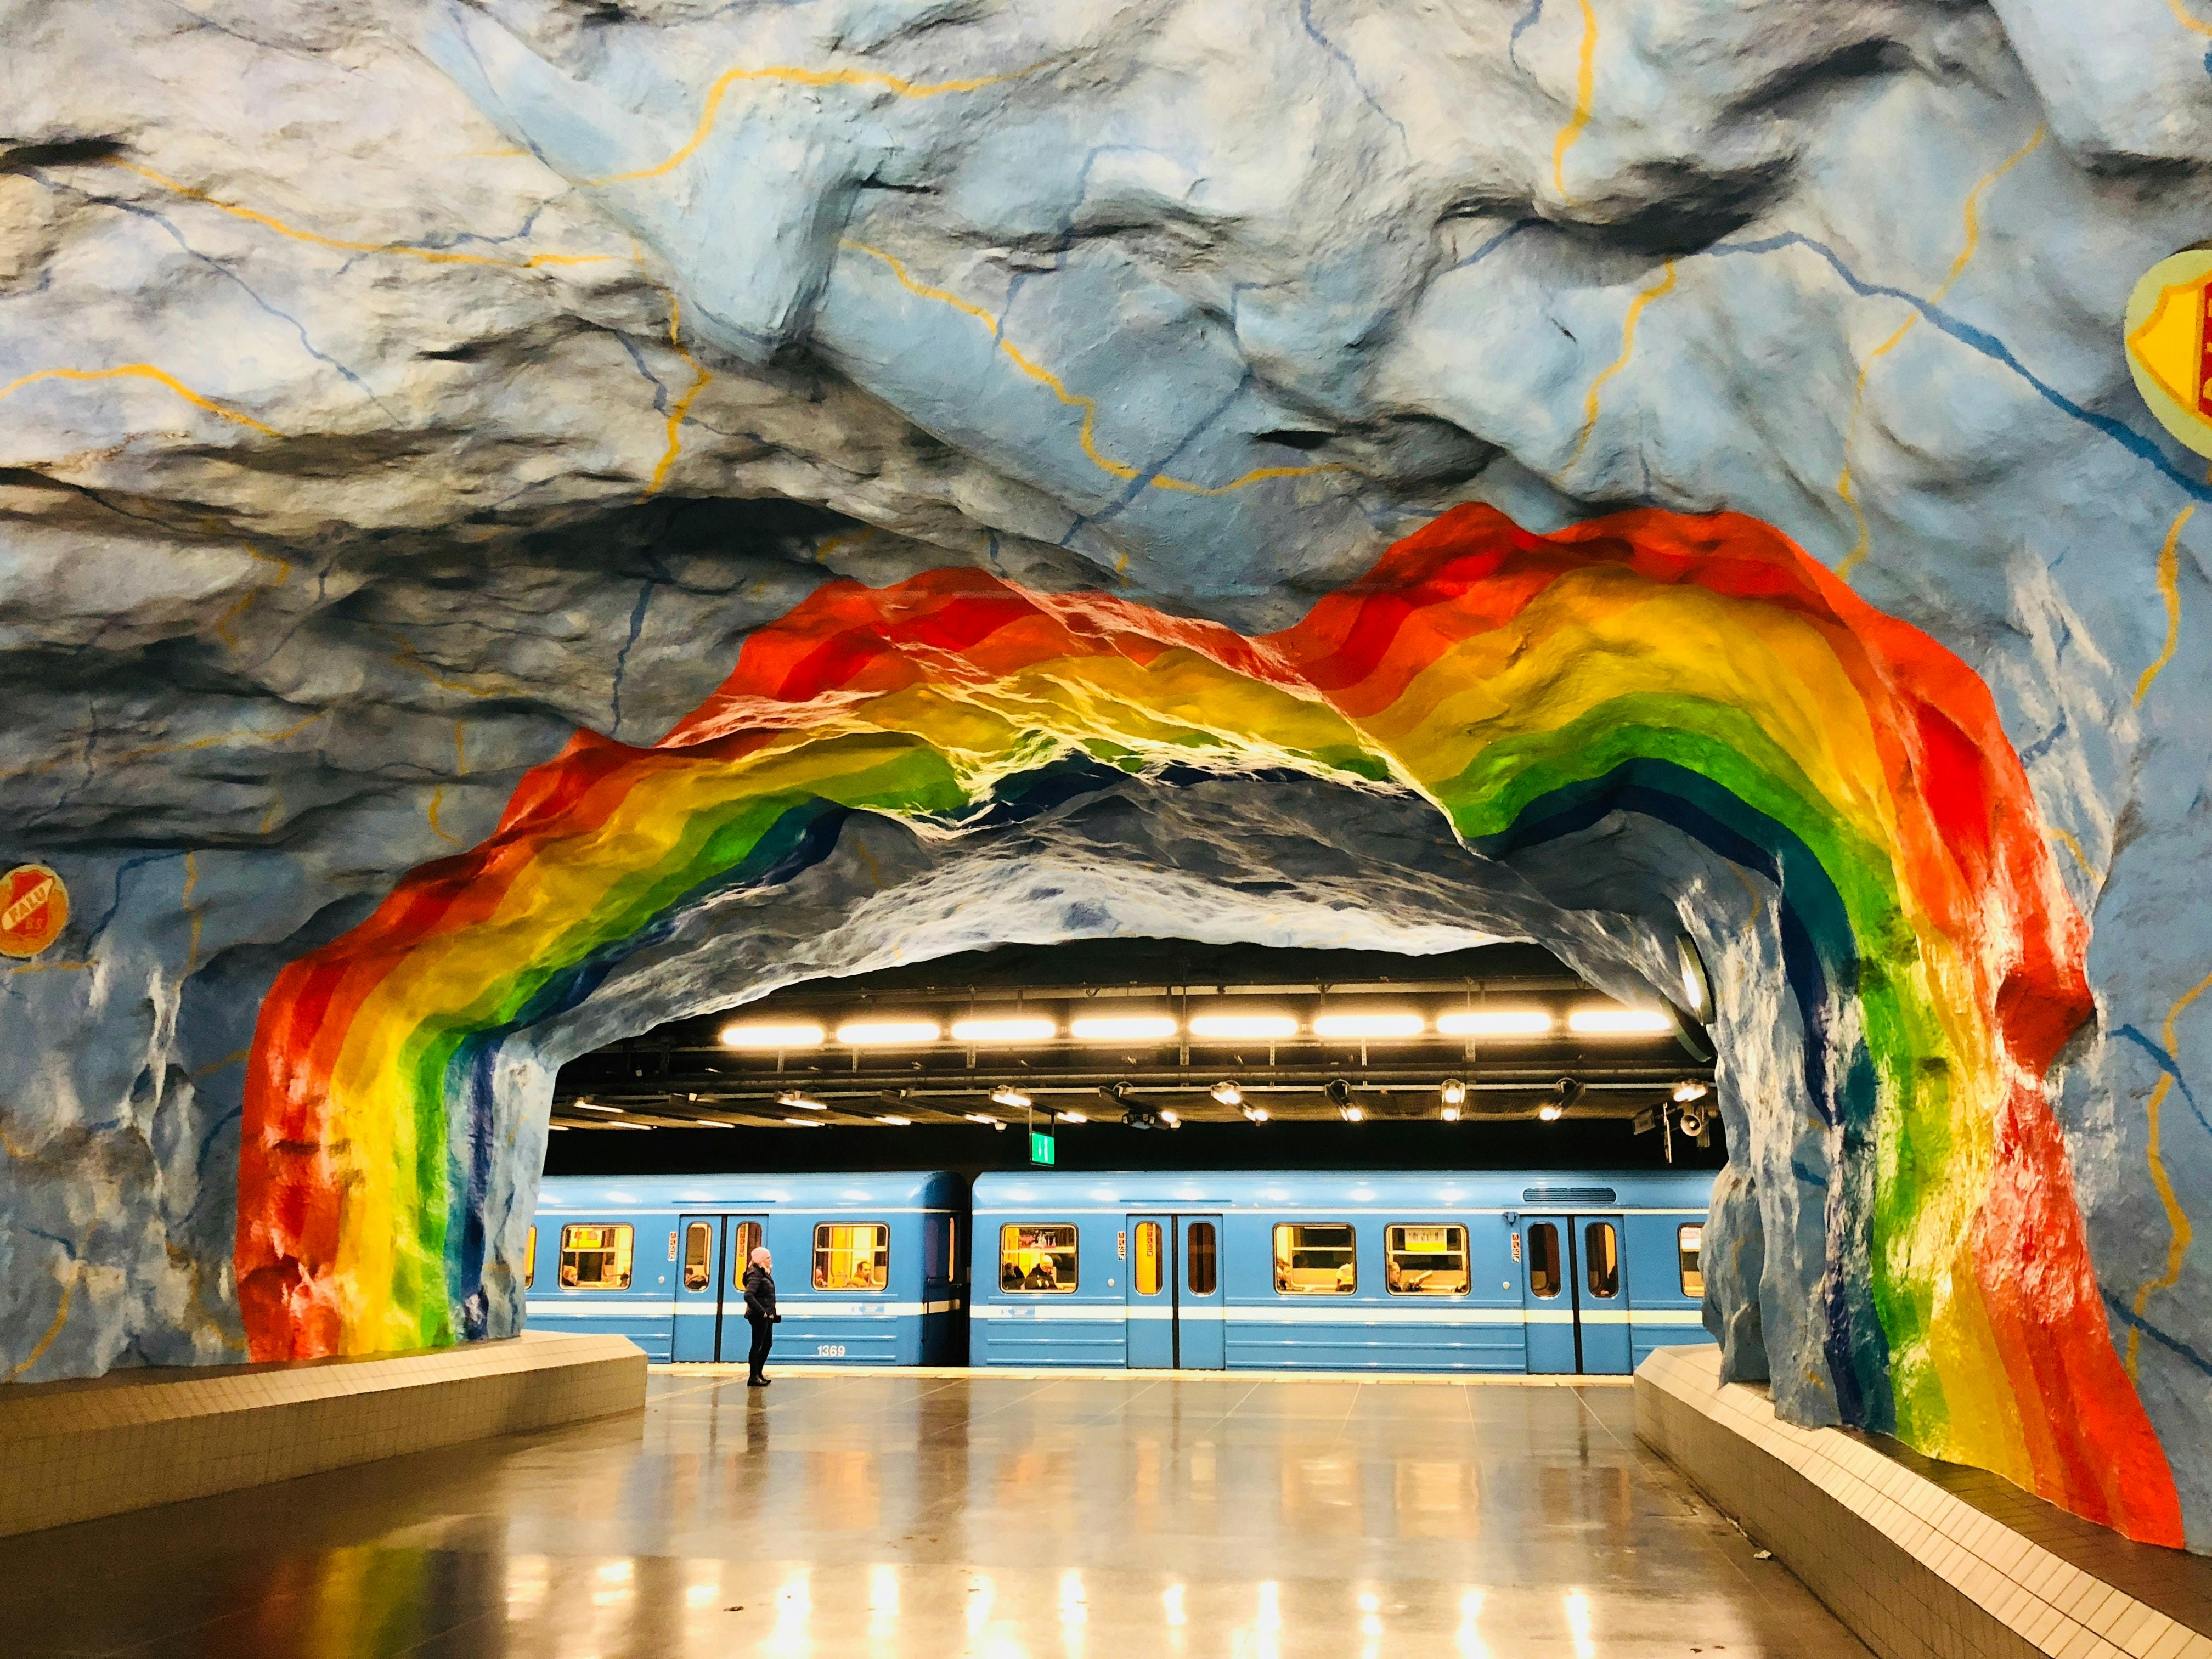 painted cave in subway station